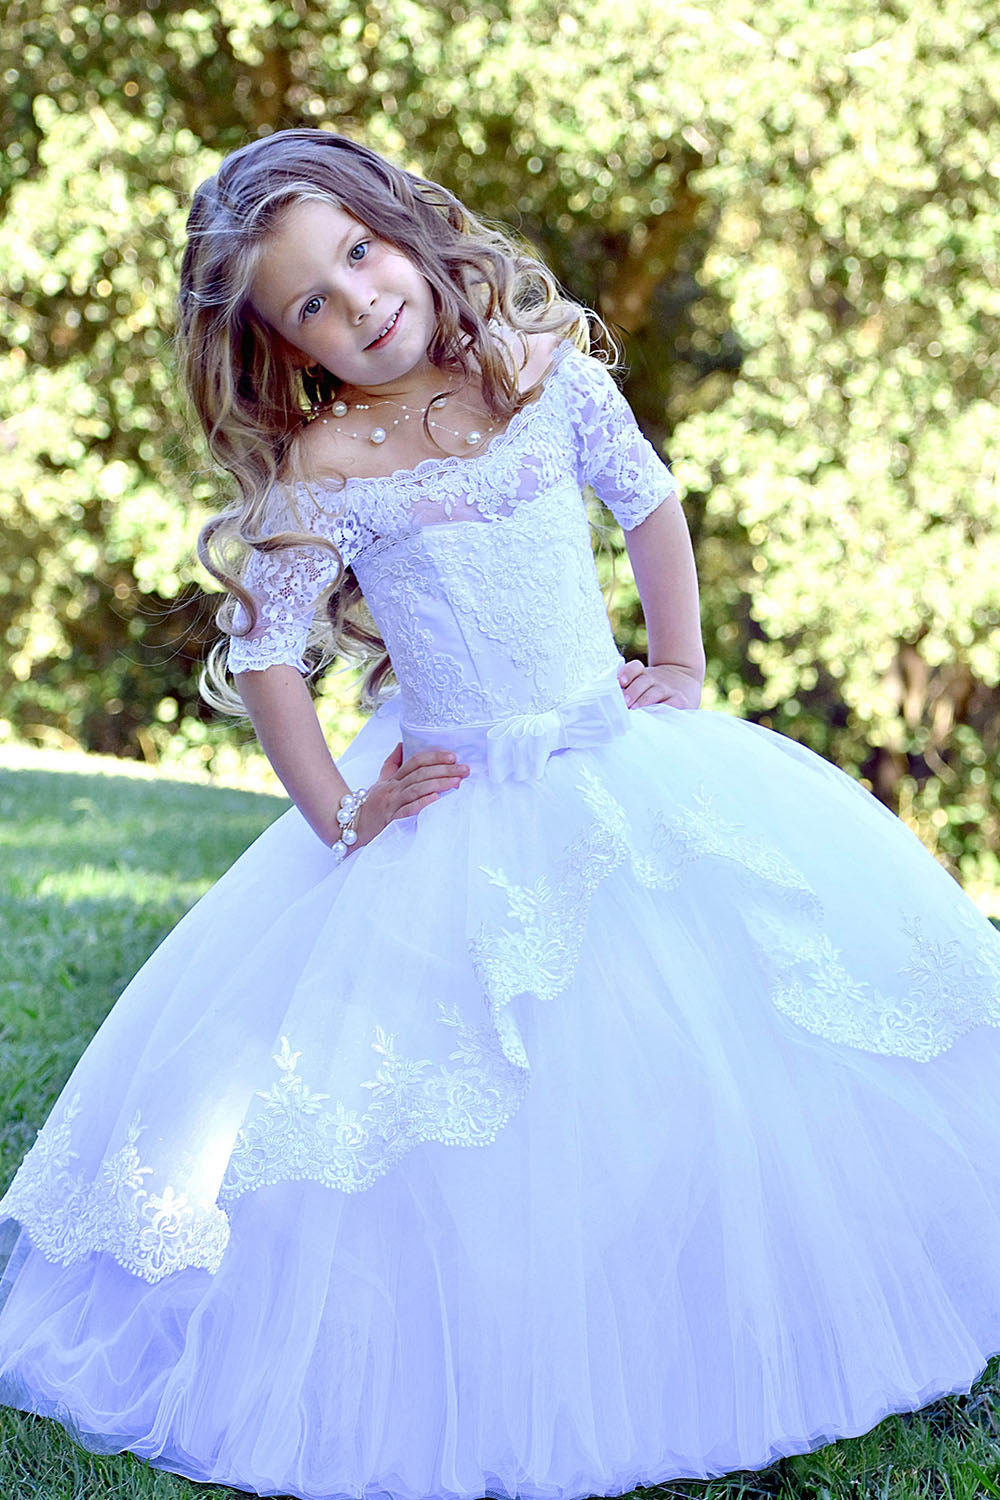 Lace-Up Off-the-Shoulder Ball Gown Flower Girl Dresses with Bow